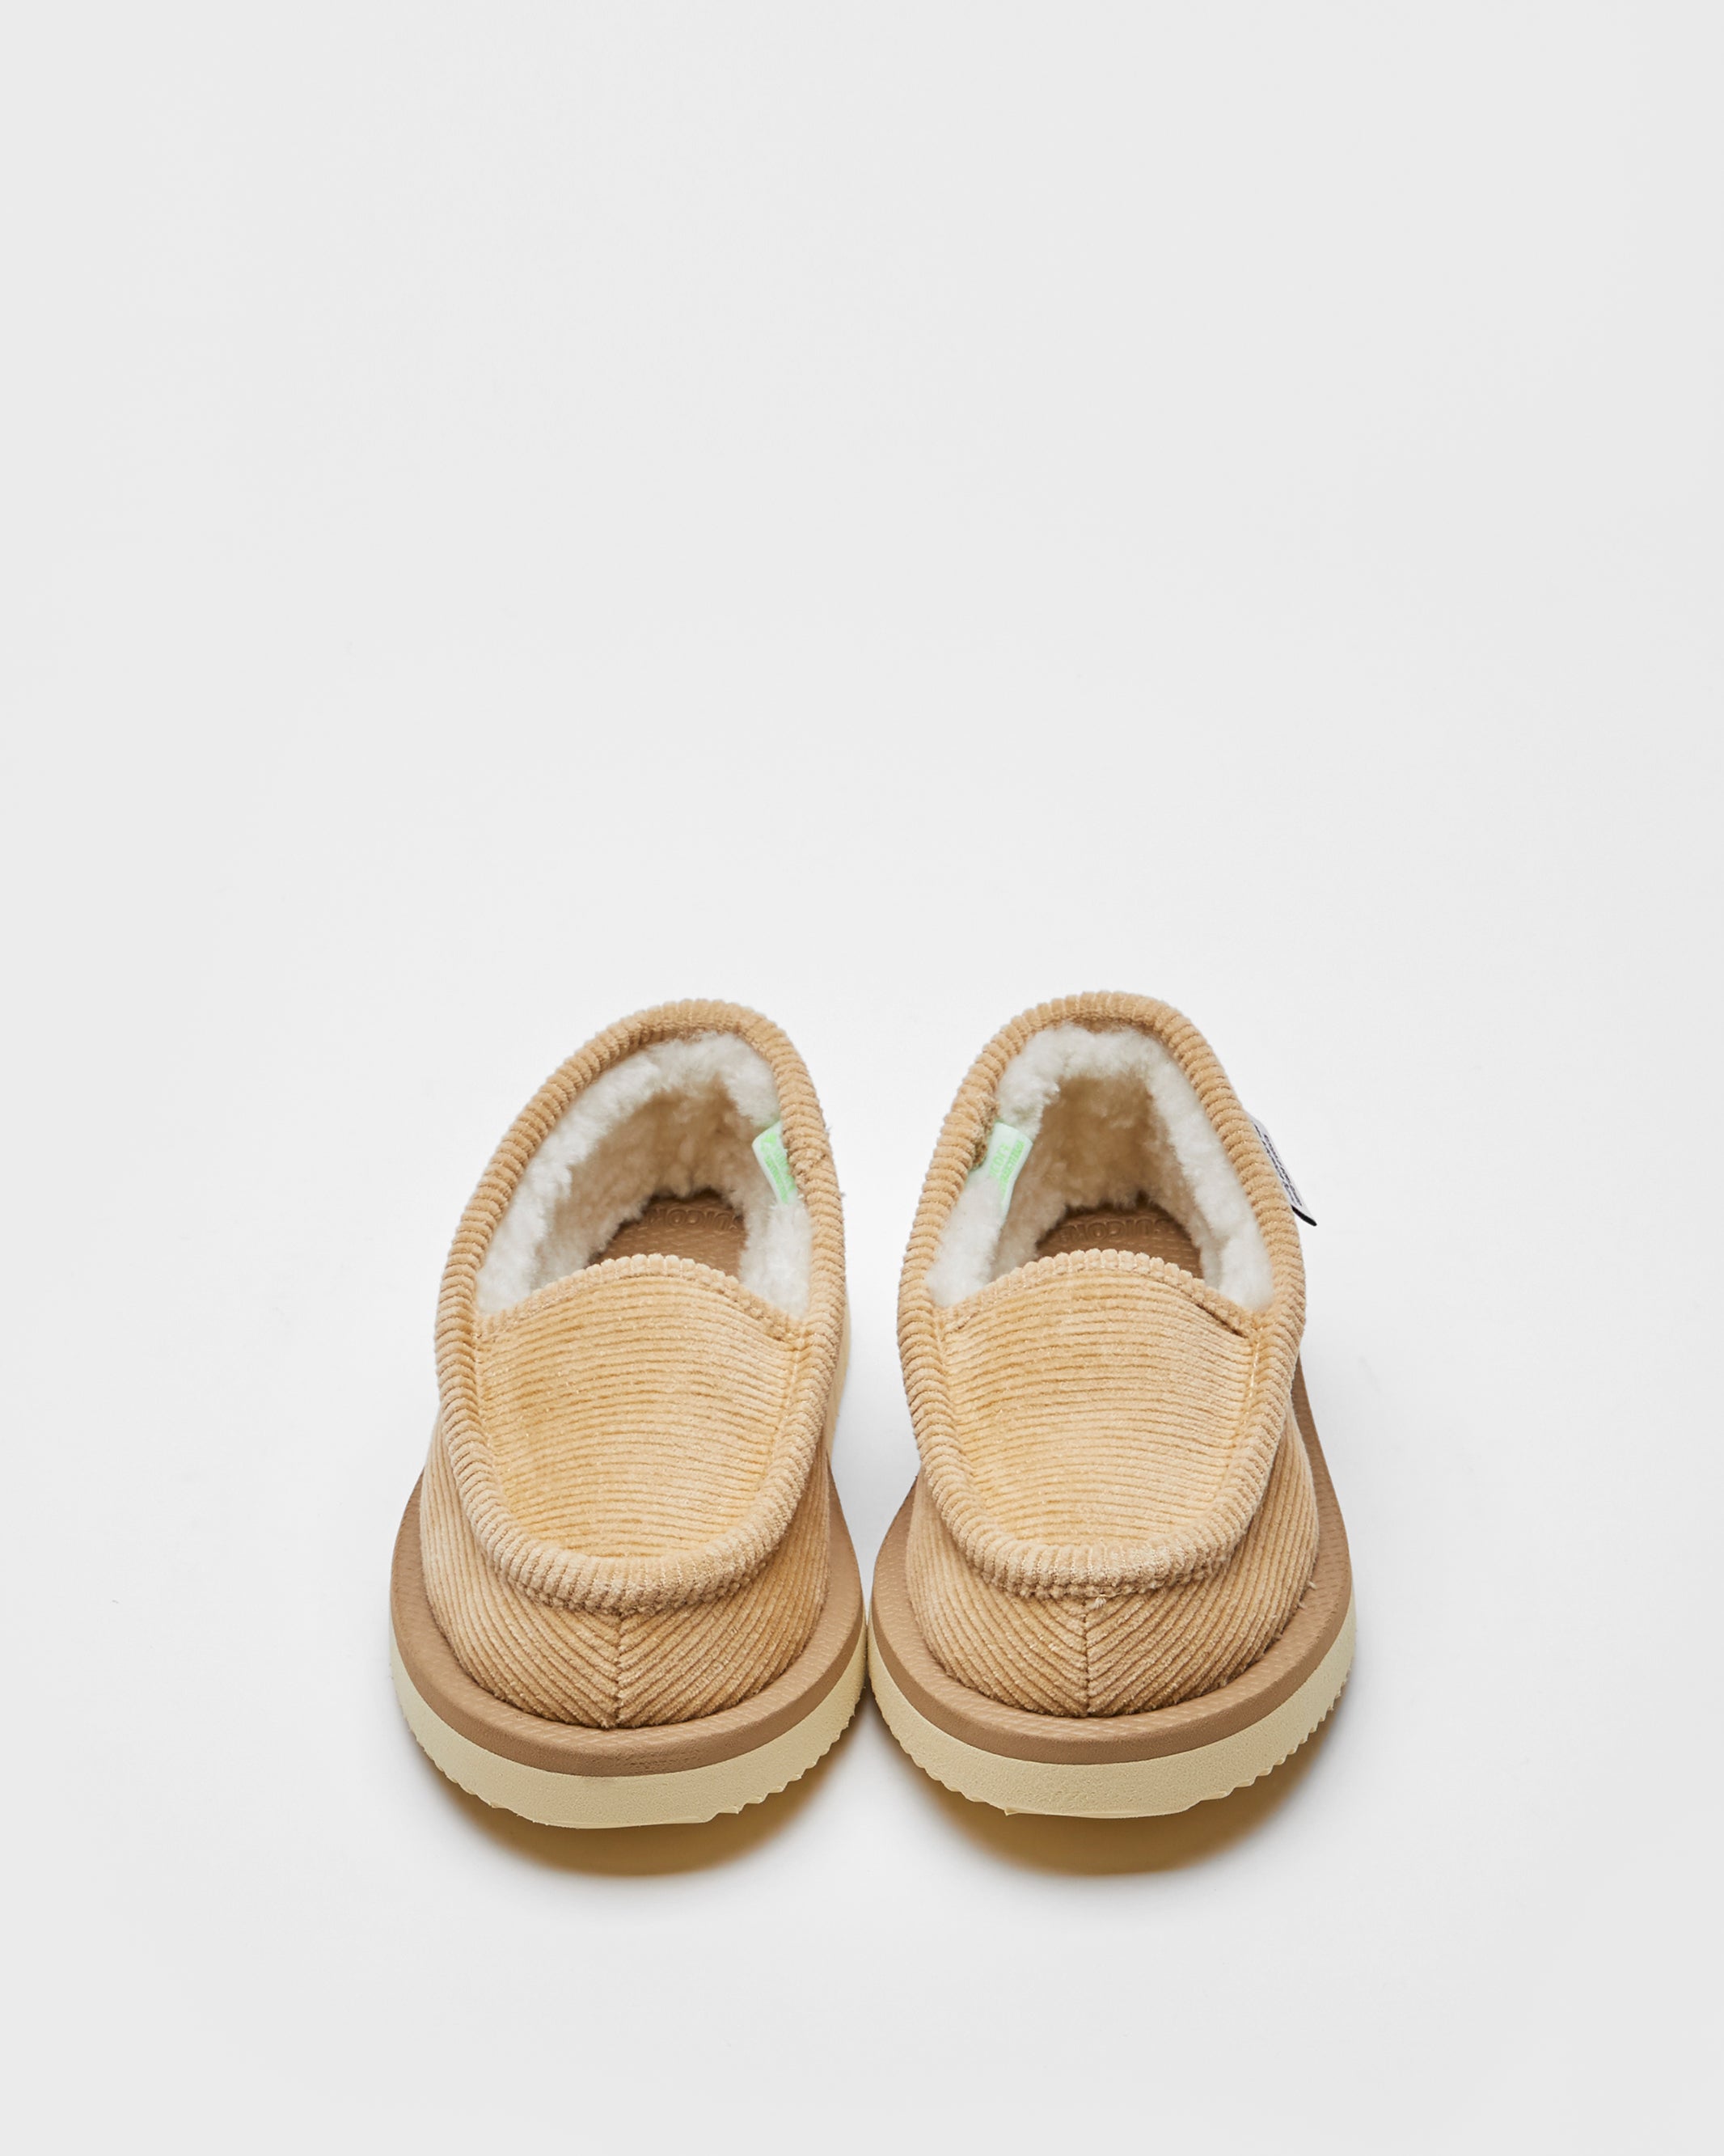 SUICOKE SSD-CoMabKIDS in Beige OG-105COMABKIDS | Shop from eightywingold an official brand partner for SUICOKE Canada and US.